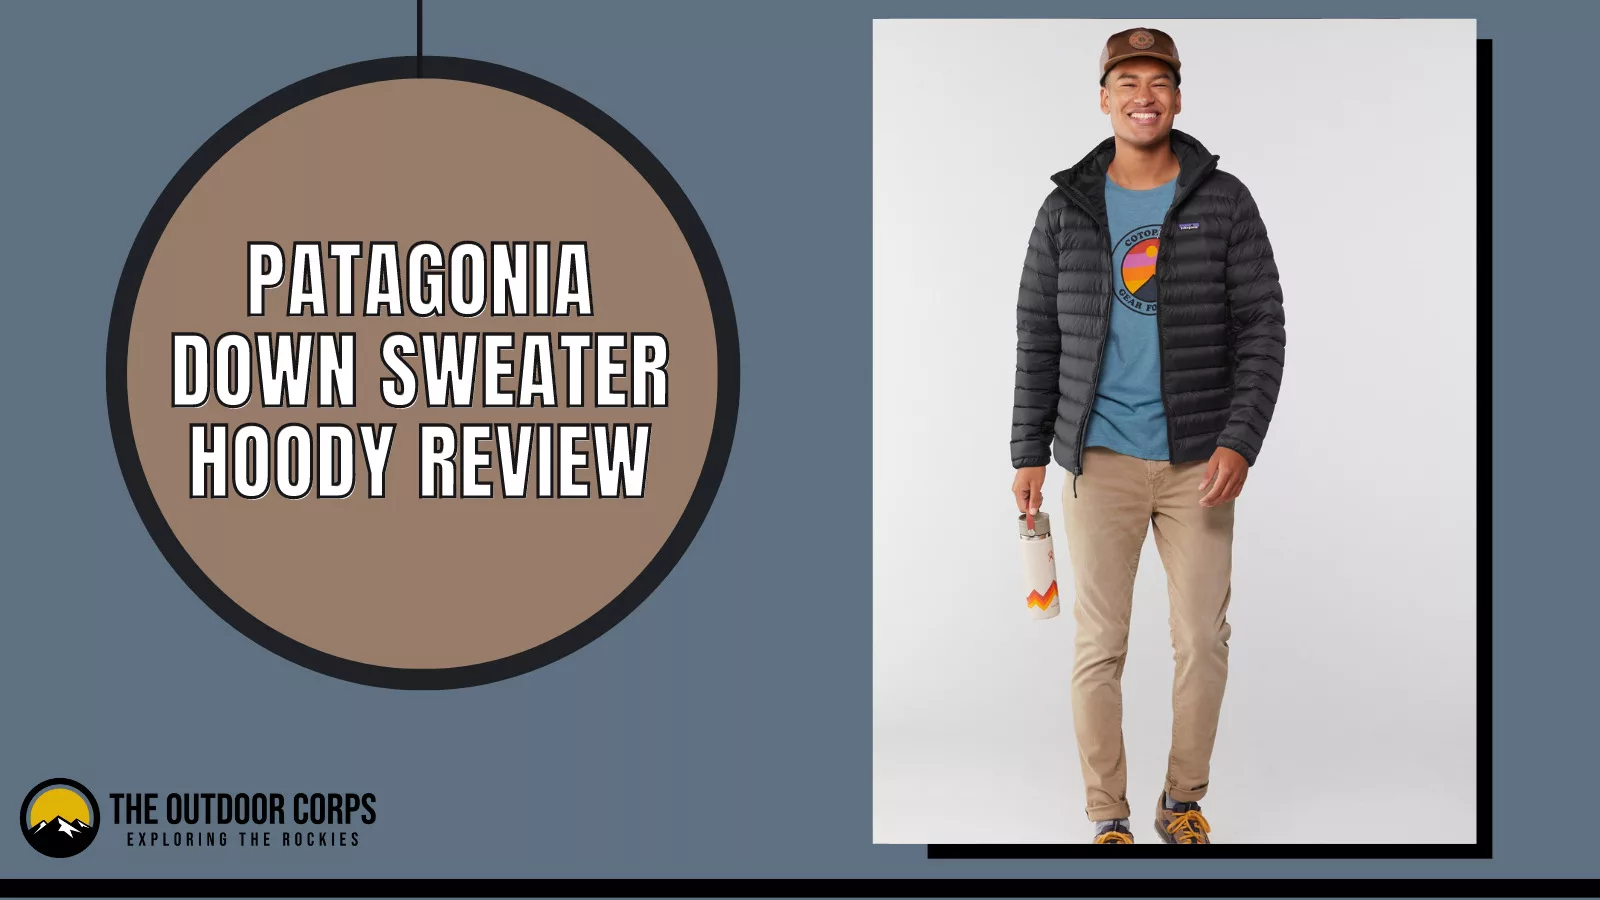 You are currently viewing Patagonia Down Sweater Hoody Review